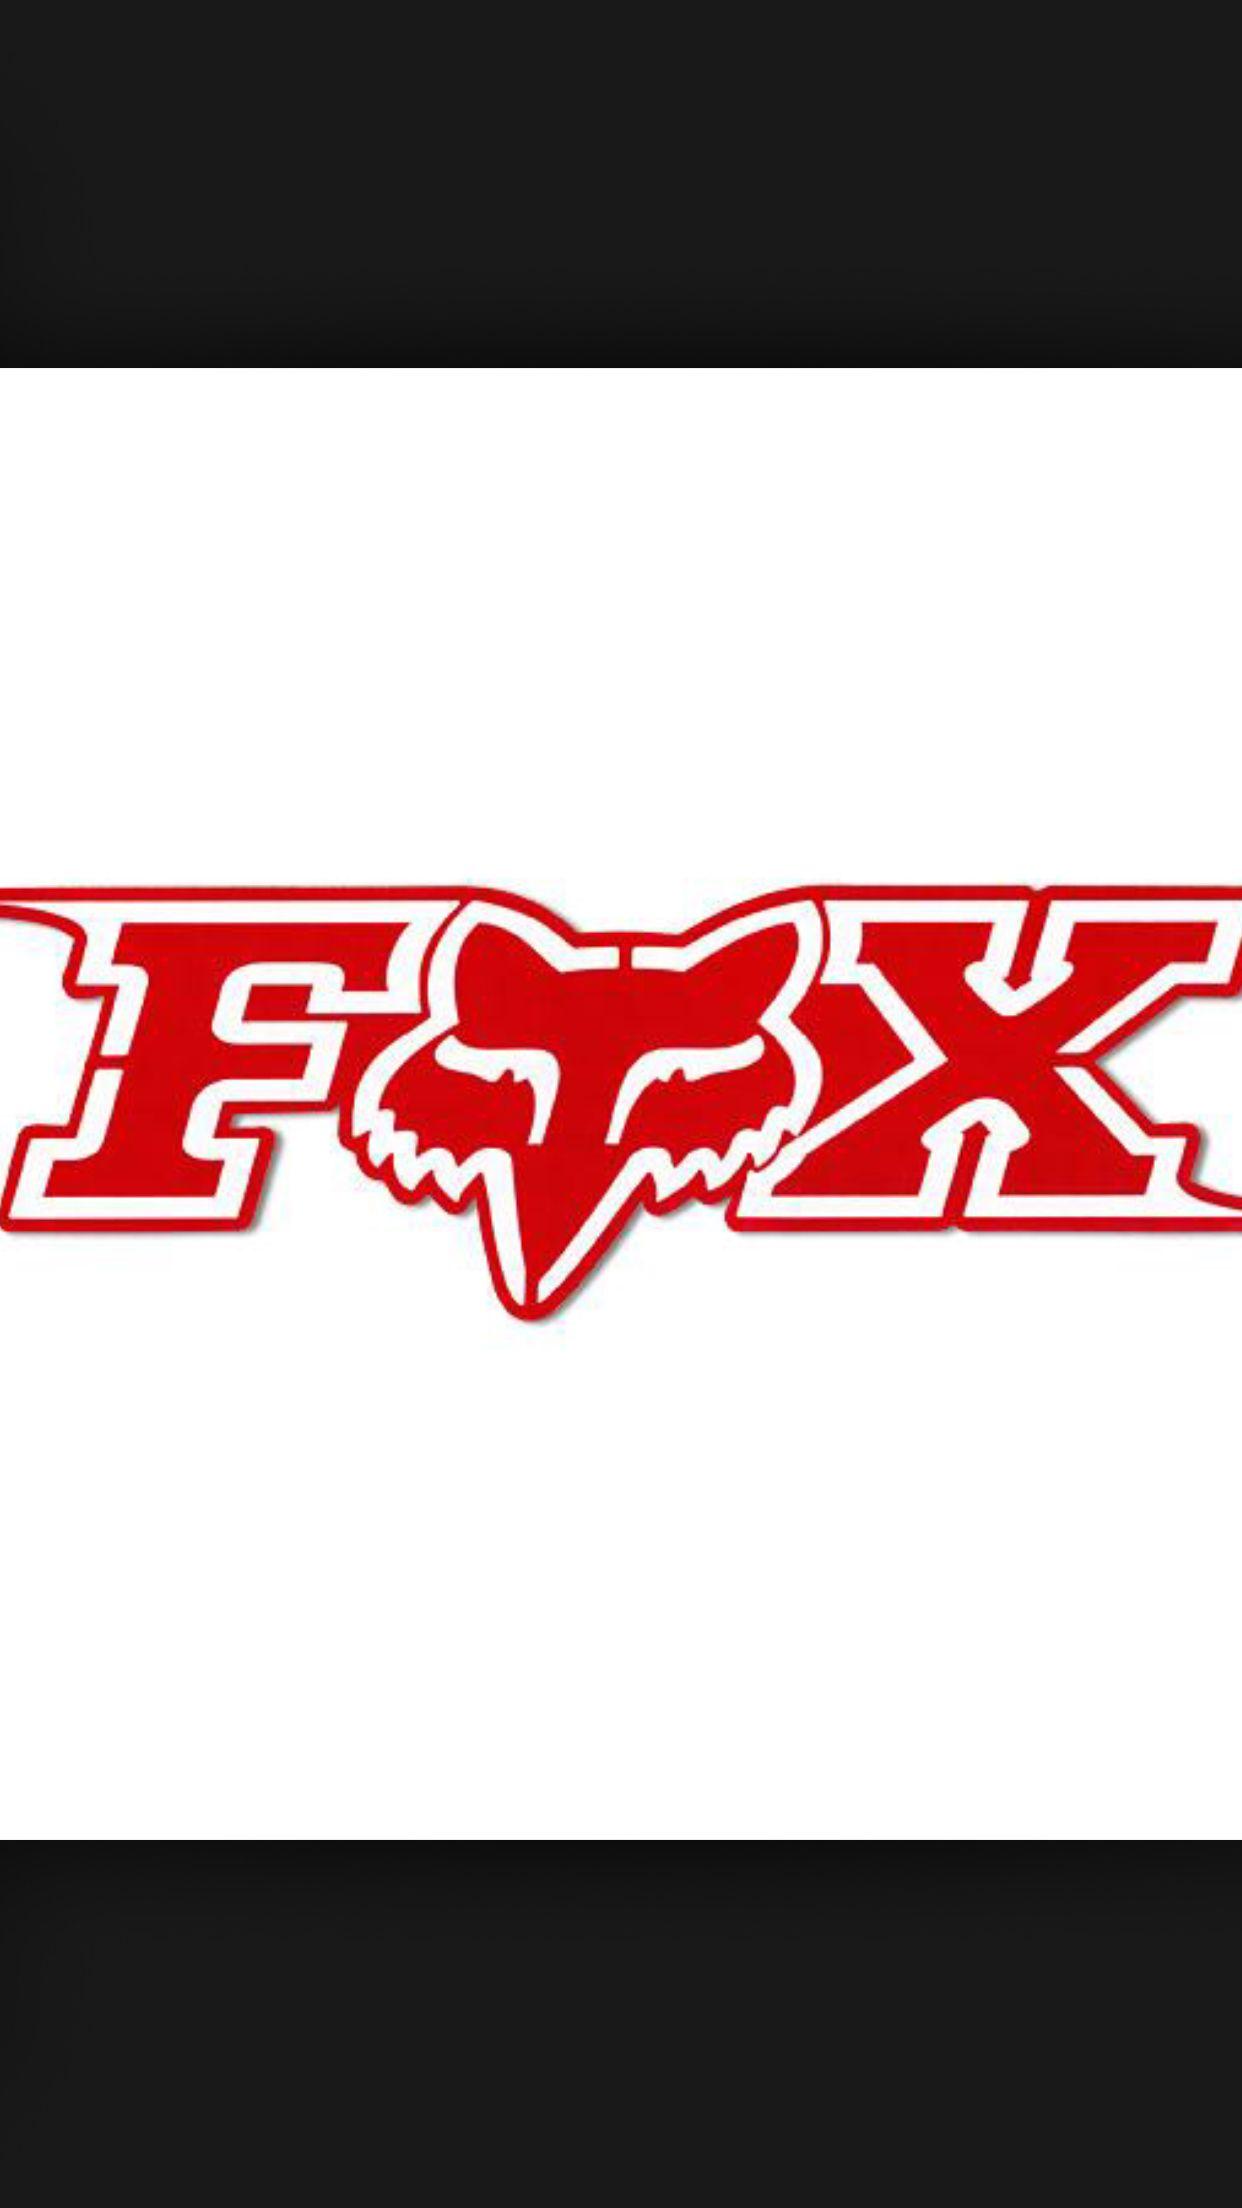 Red and White Racing Logo - Pin by King_Tyler on Atv_Clothes | Fox racing, Racing, Fox